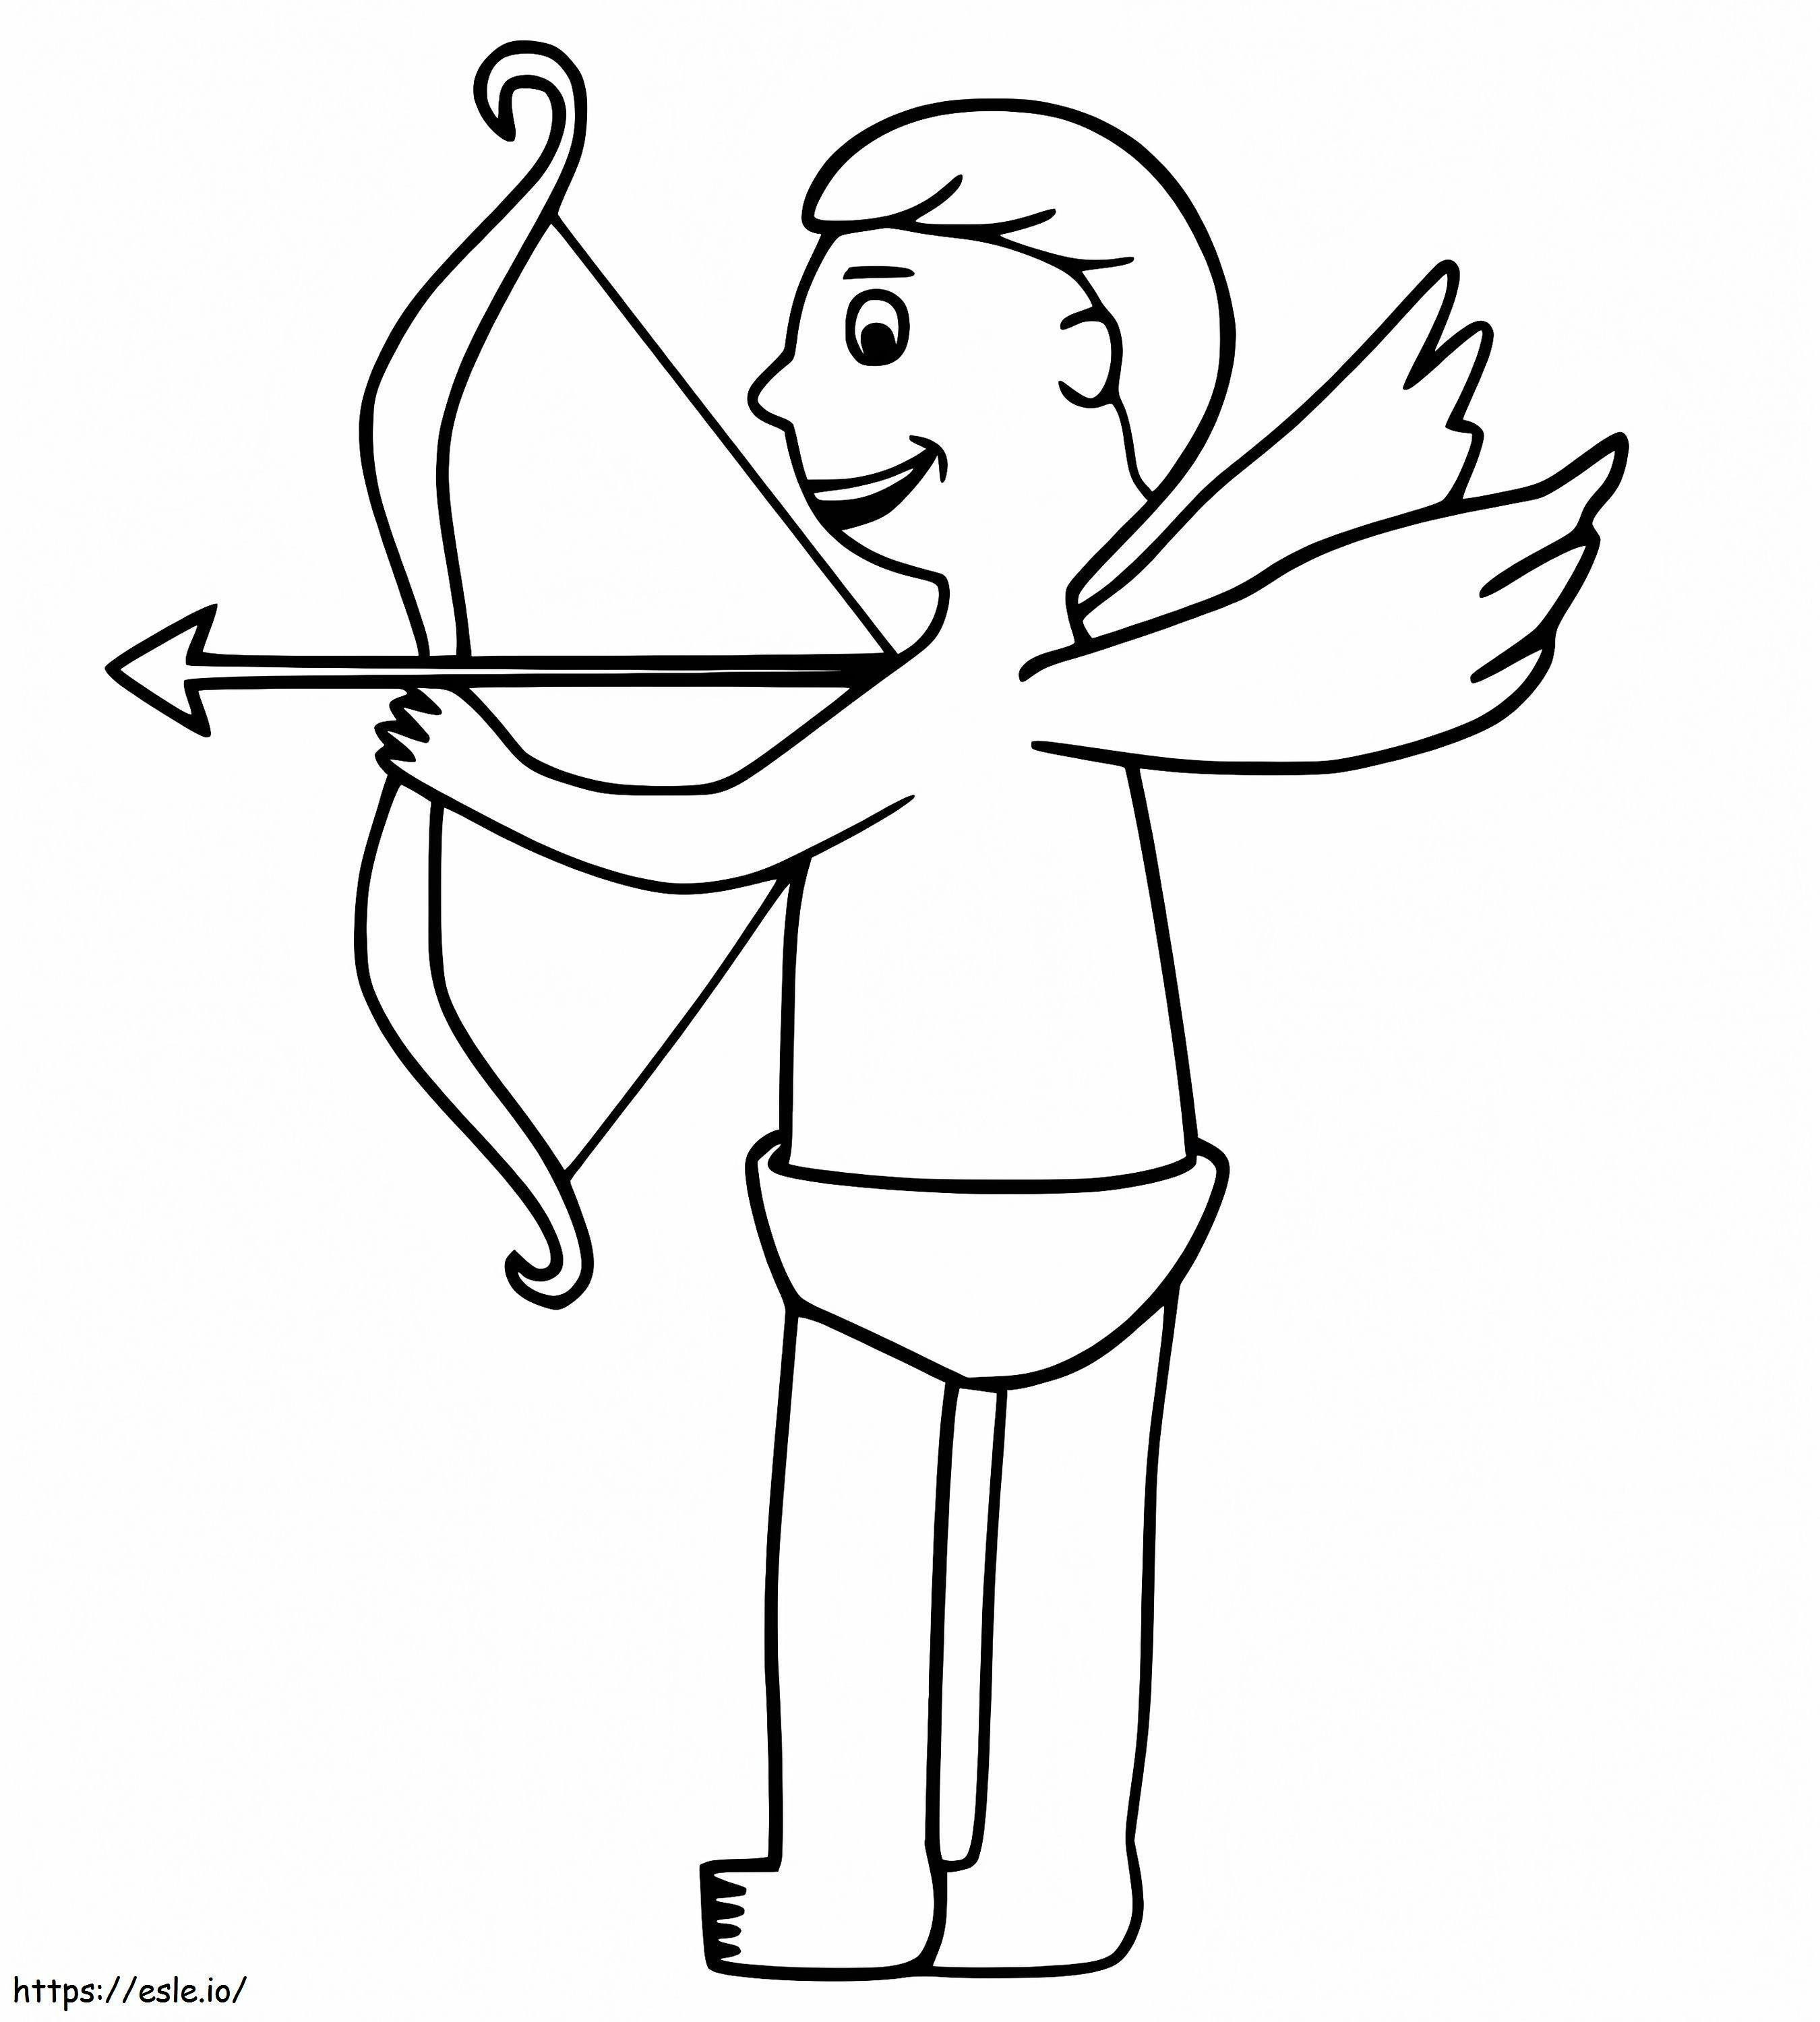 Easy Cupid coloring page